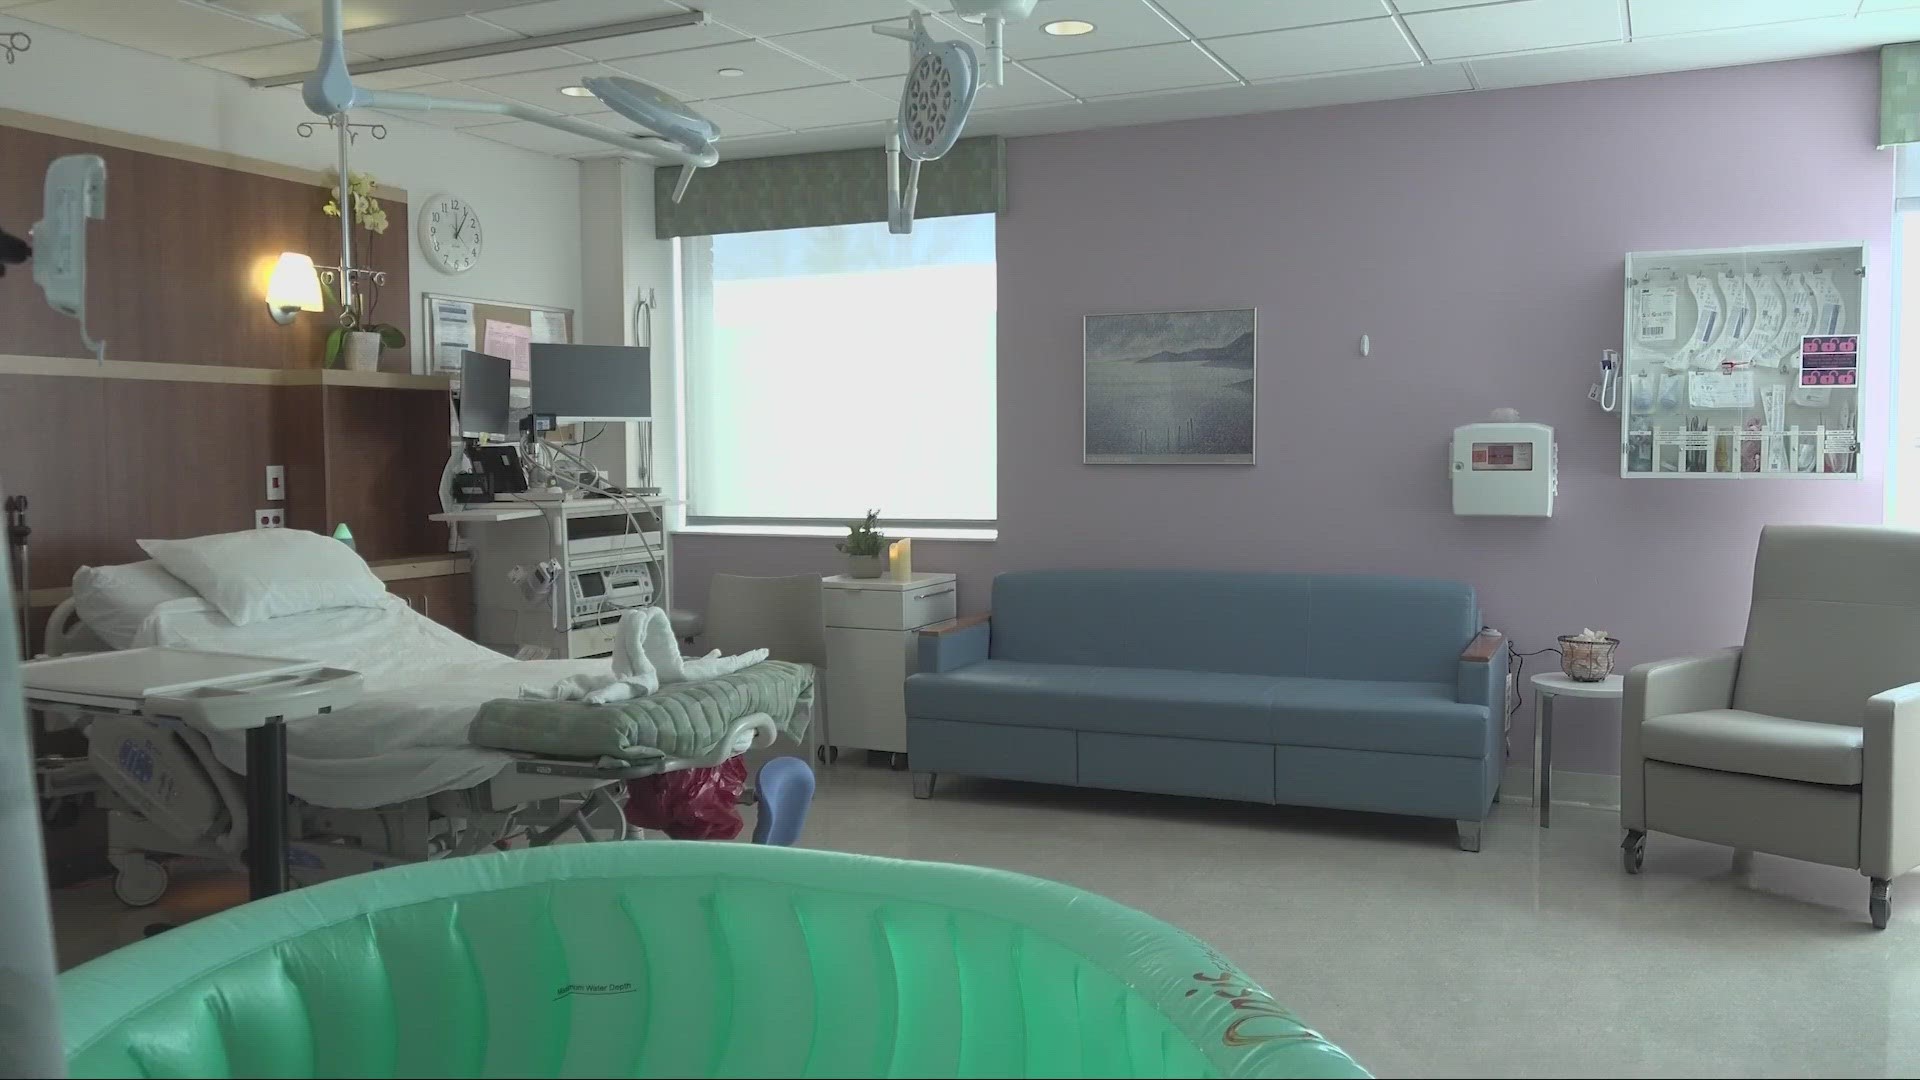 Four new birthing suites have opened for low-risk women who want minimal medical intervention.